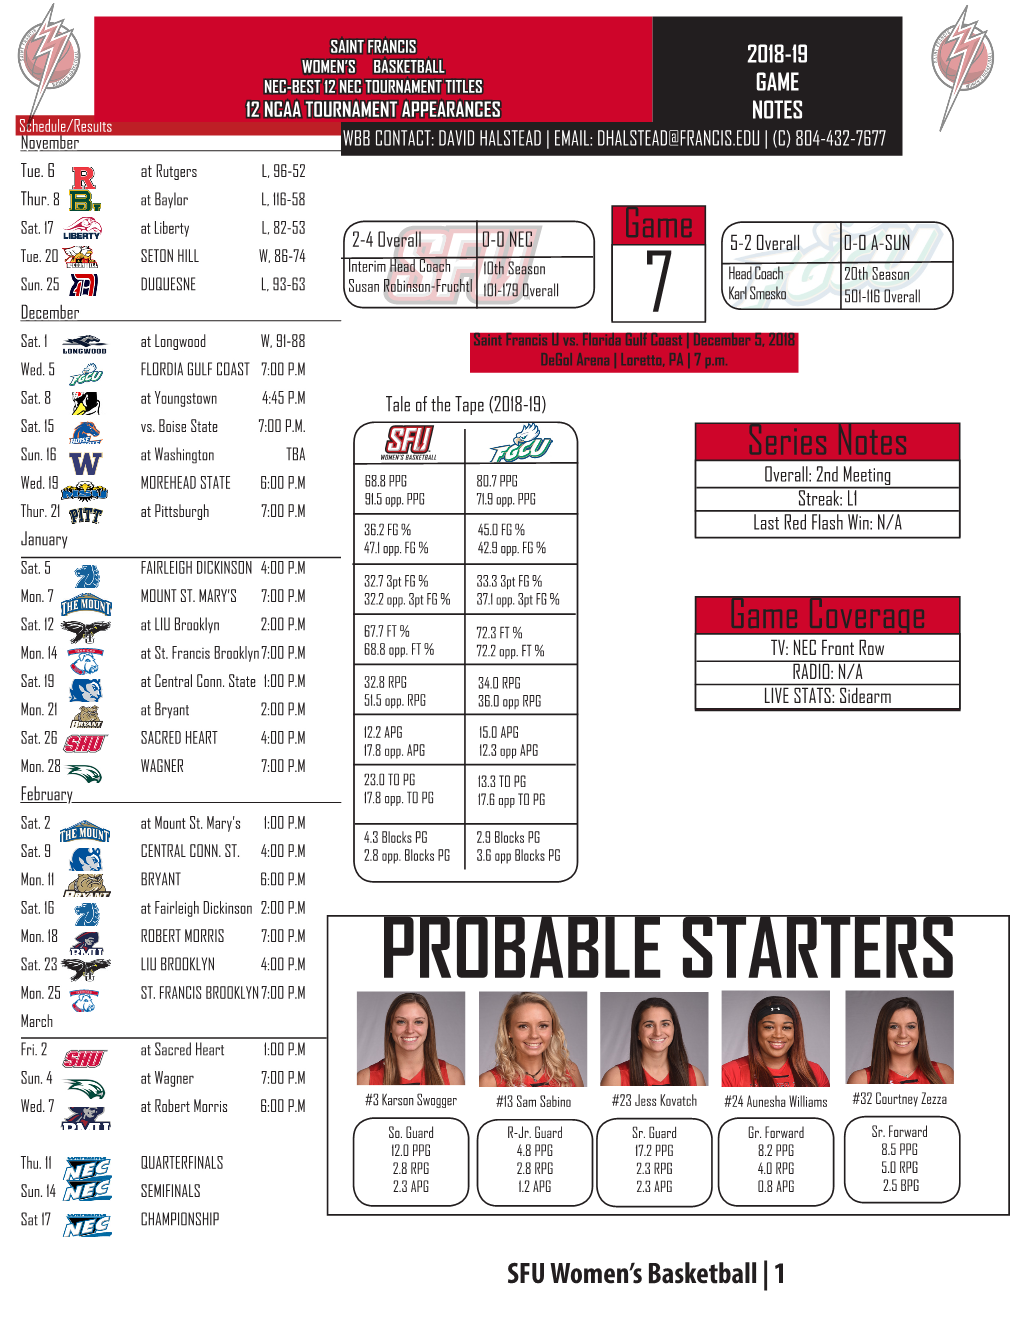 7 Probable Starters